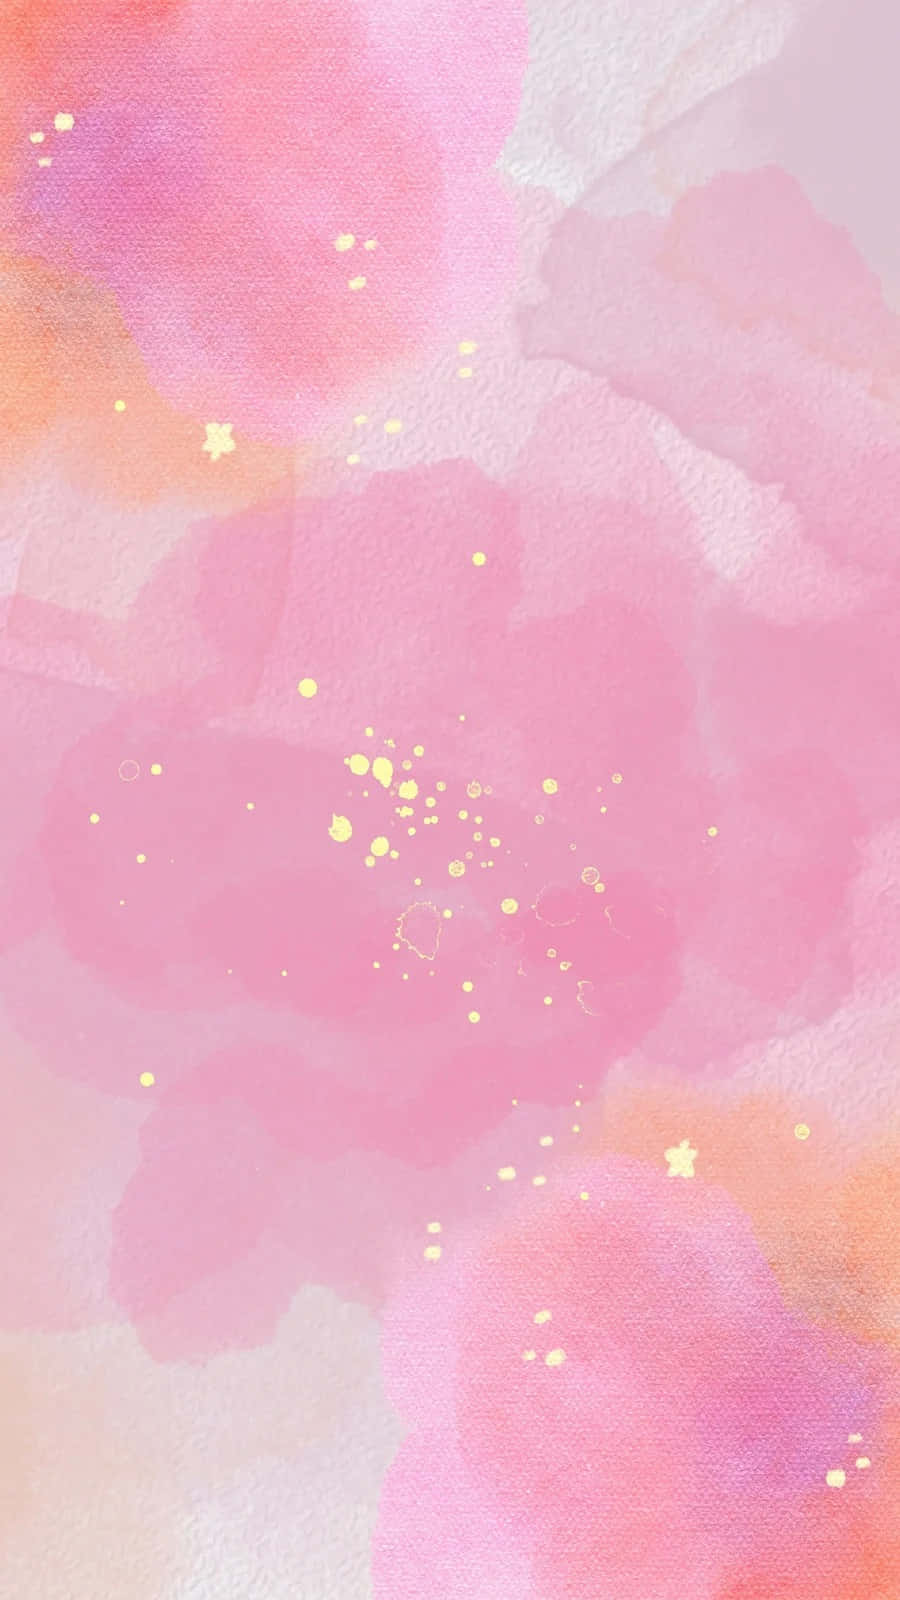 A beautiful and charming Pretty Pink background